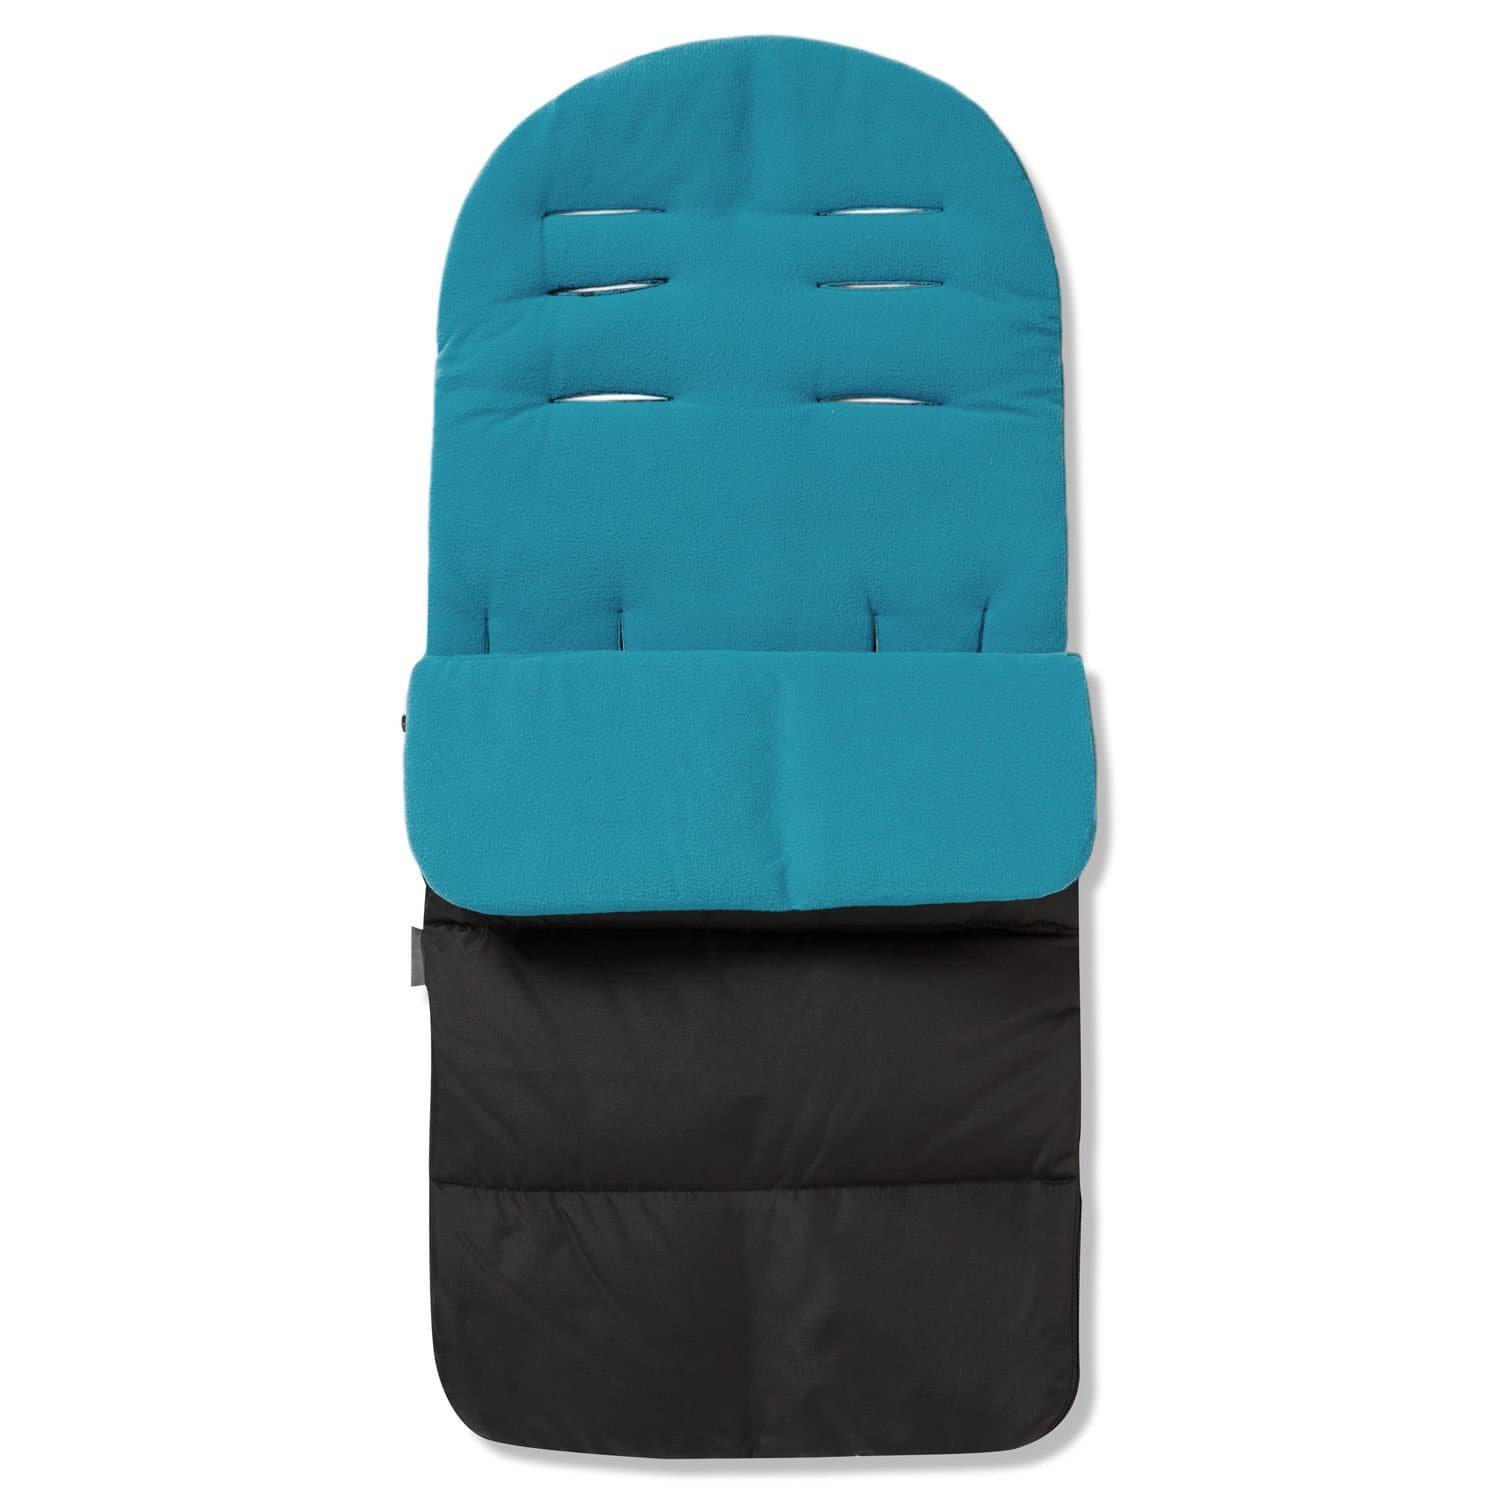 Premium Footmuff / Cosy Toes Compatible with Greentom - For Your Little One